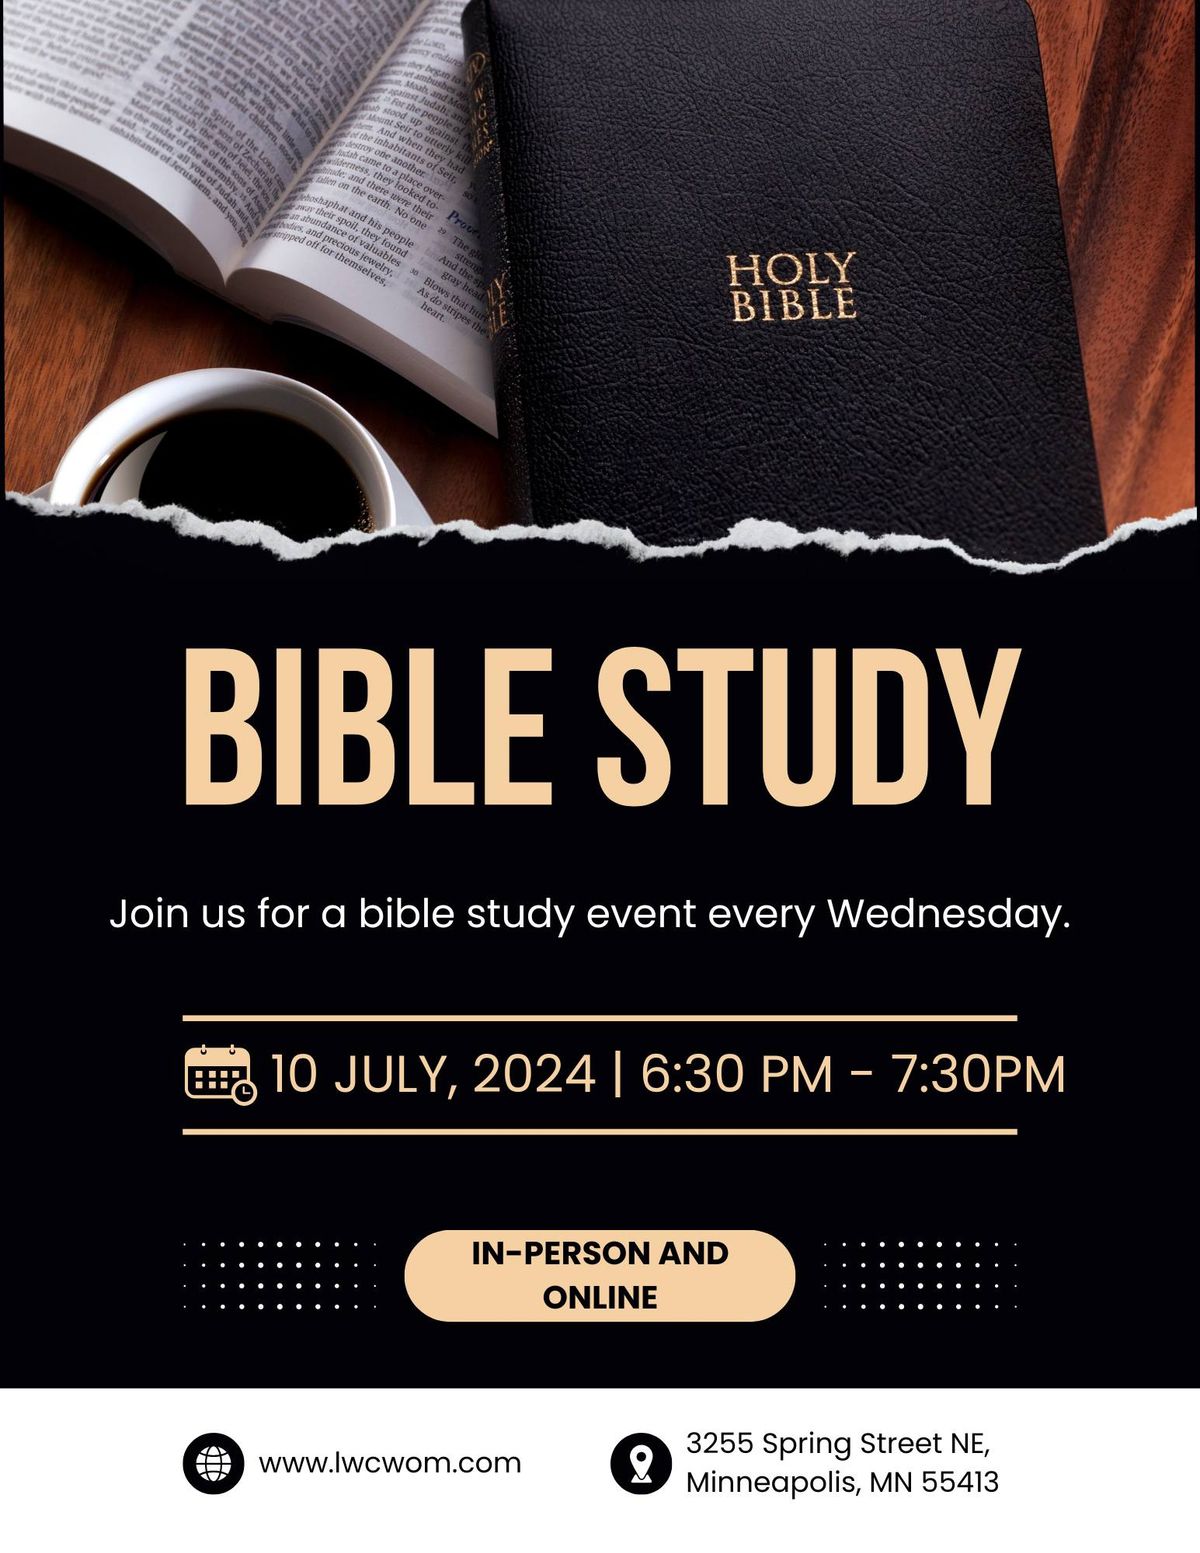 Bible Study July 10th at Living Word Church and World Outreach Ministries